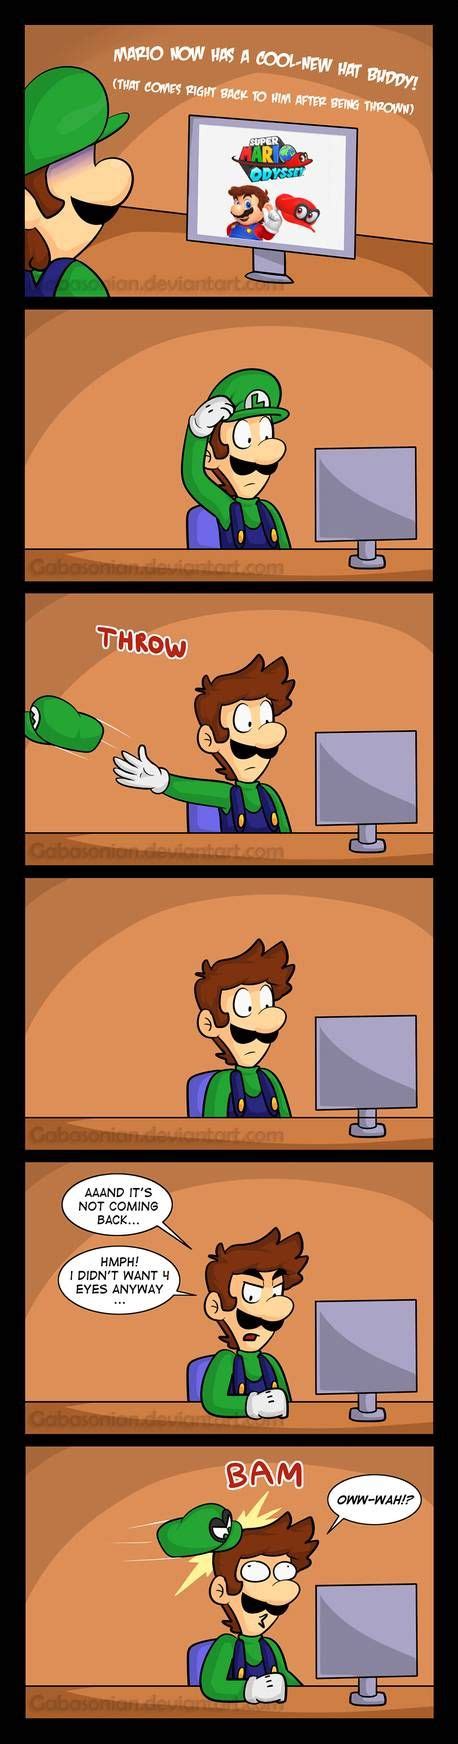 A Comic Strip With An Image Of Mario And Luigi On The Shelf In Front Of